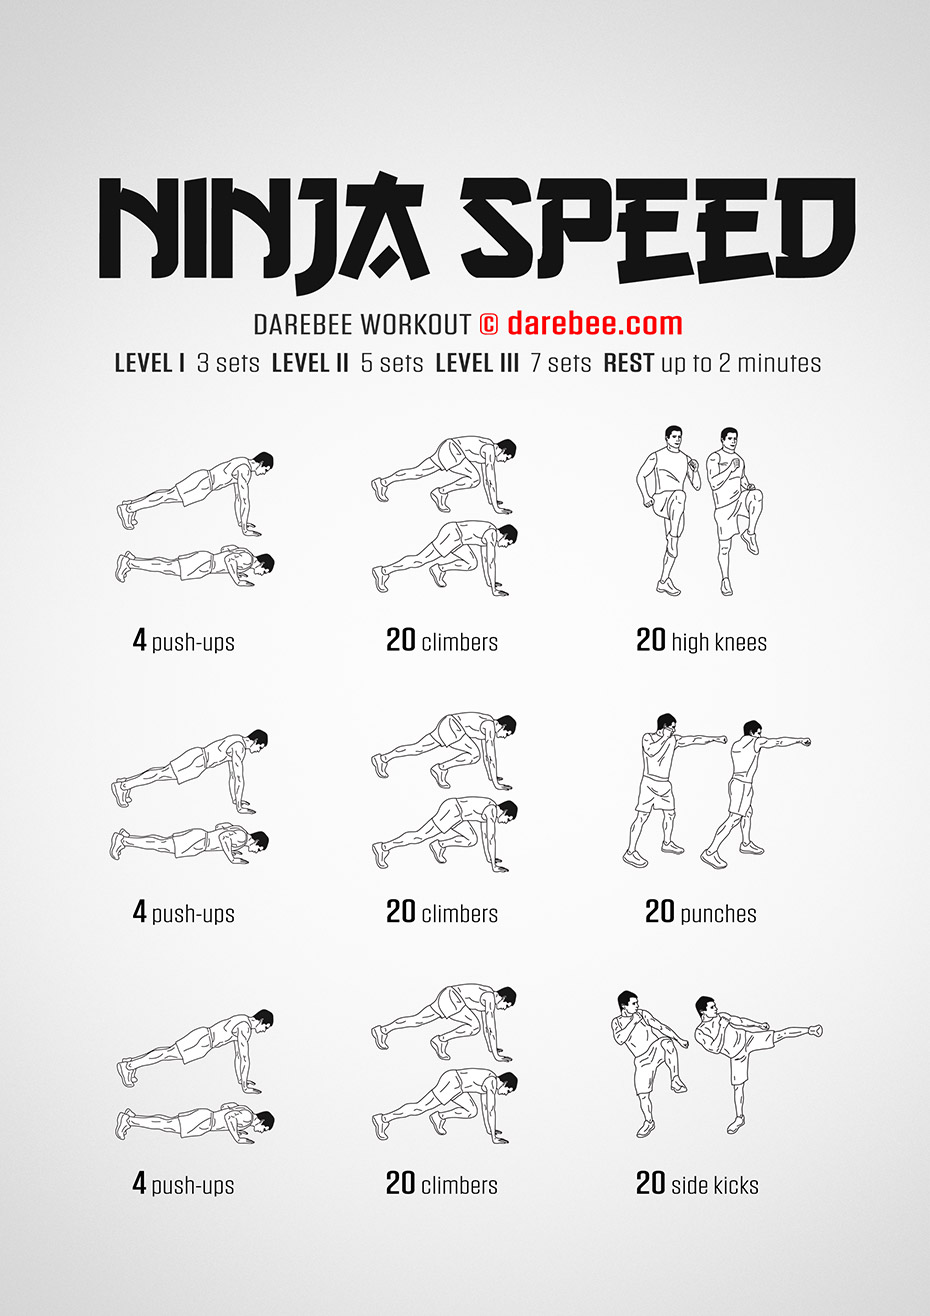 The Beginner Ninja Workout: Bodyweight Training to Scale Up!